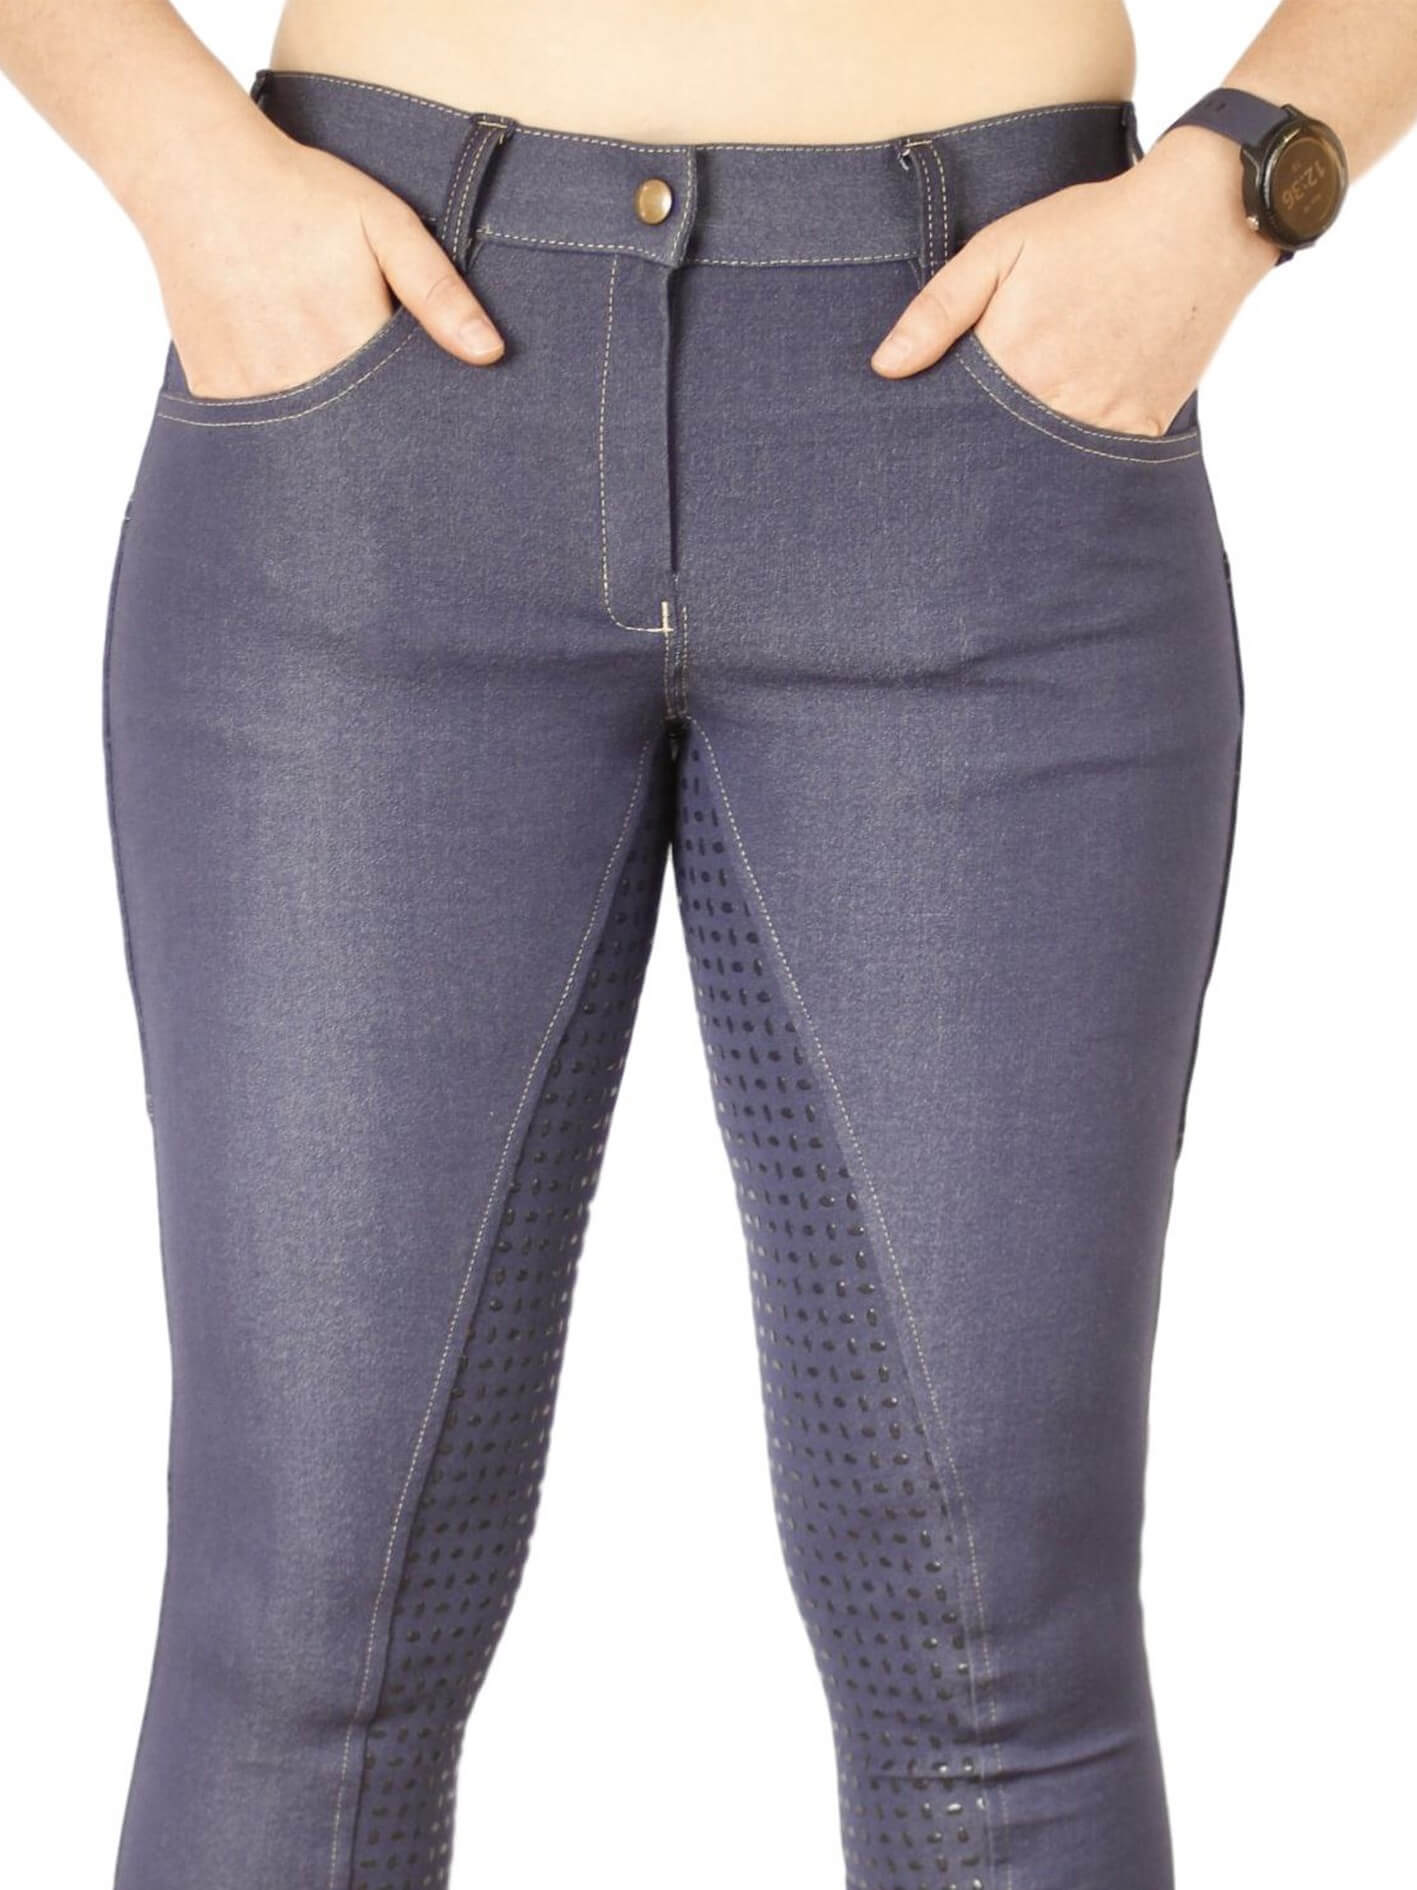 Denim Jodhpurs with silicone seat and phone pocket-Plum Tack-The Equestrian